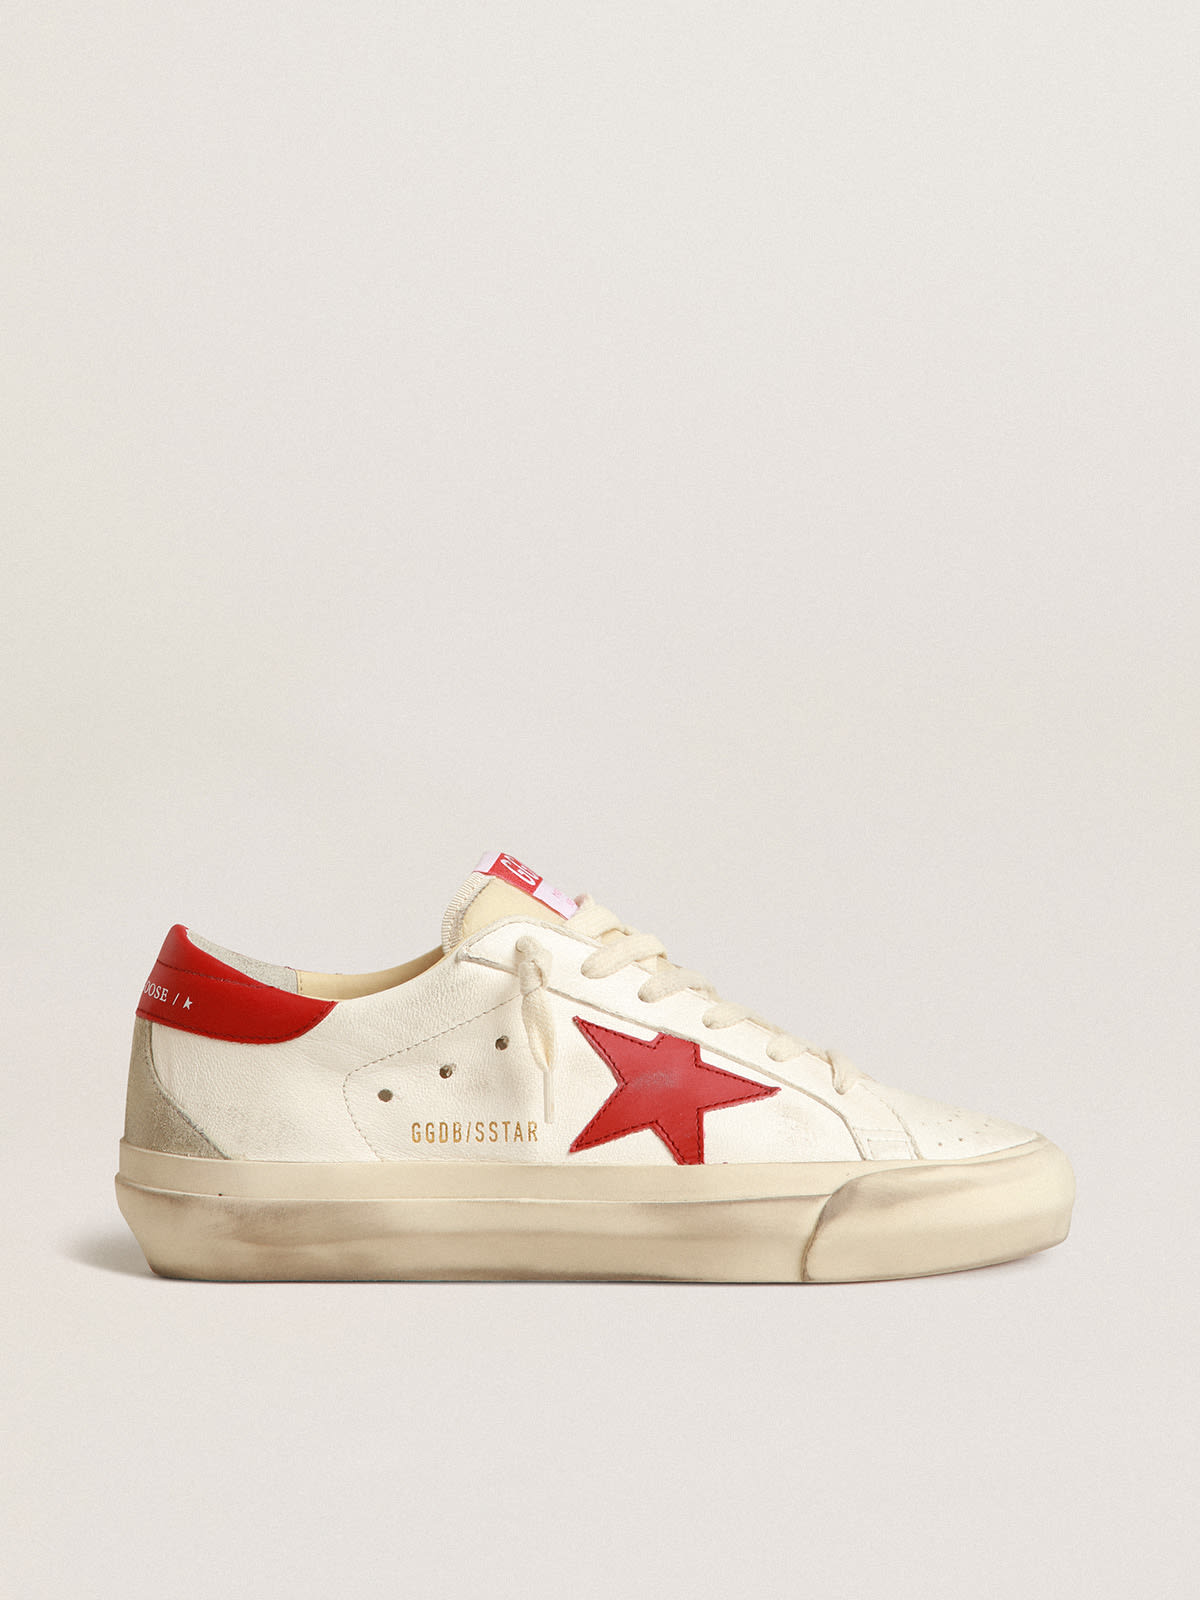 Golden Goose - Men’s Super-Star LTD in nappa leather with red star and heel tab in 